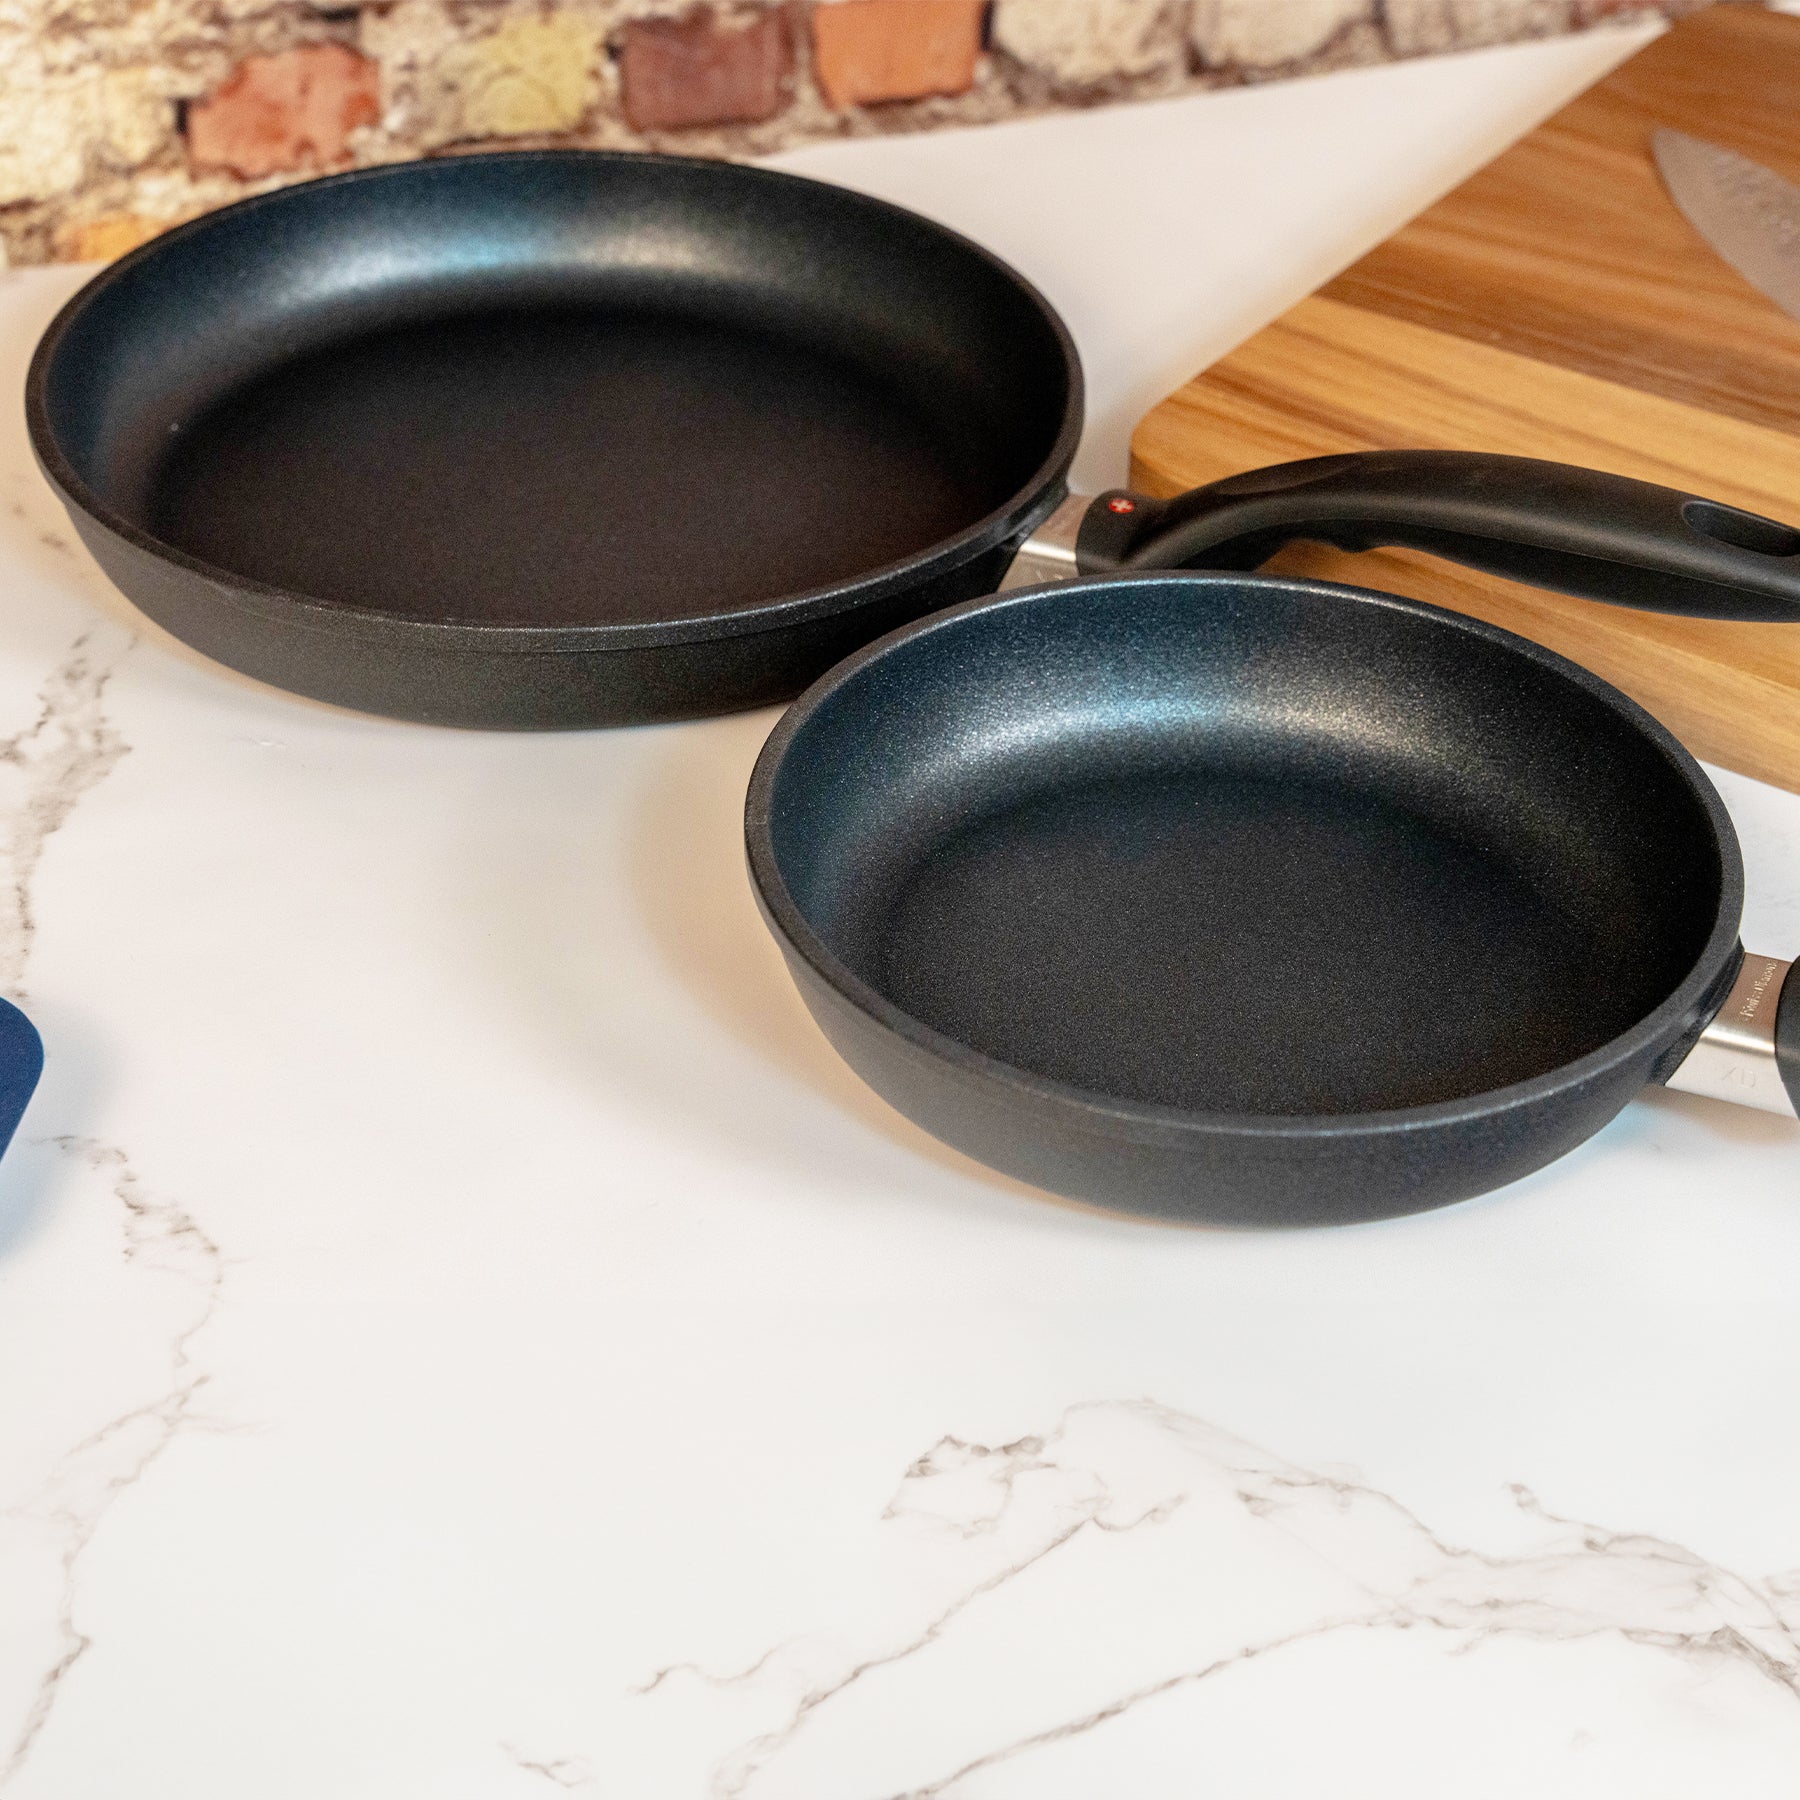 XD Nonstick 2-Piece Fry Pan Set on kitchen counter side view